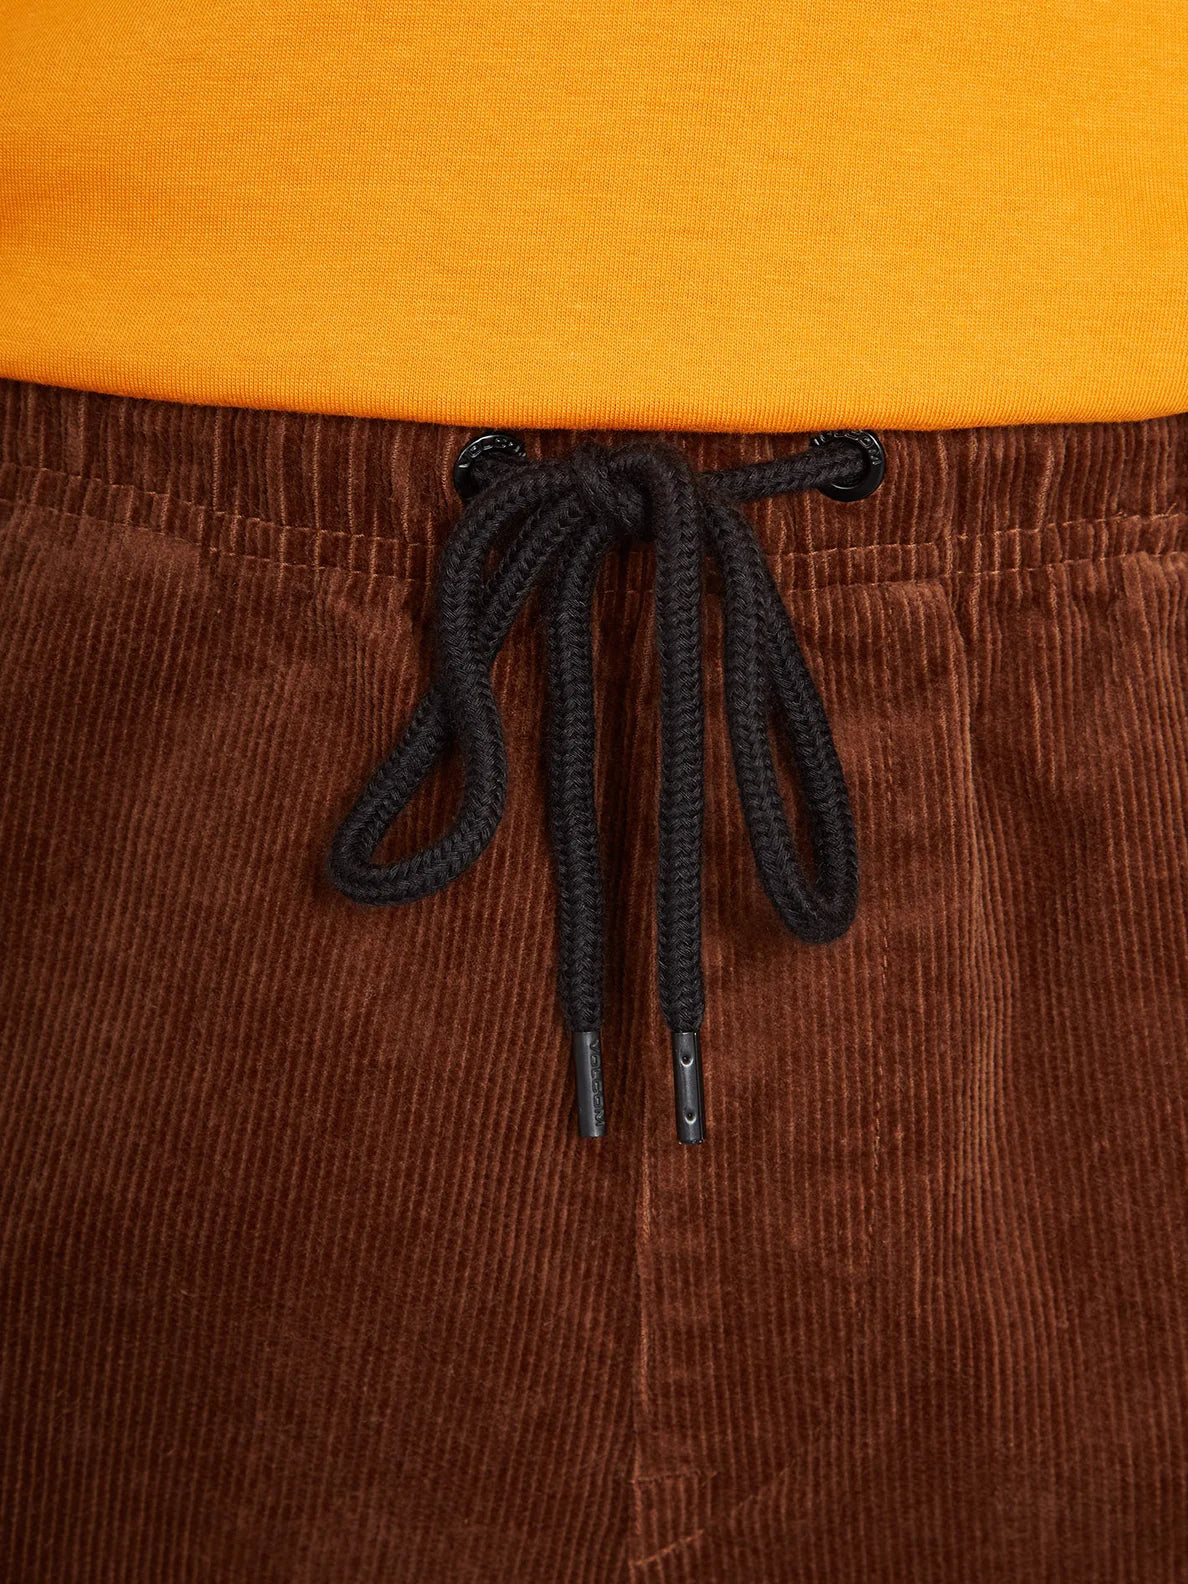 Short Volcom Outer Spaced 21" - Burro Brown